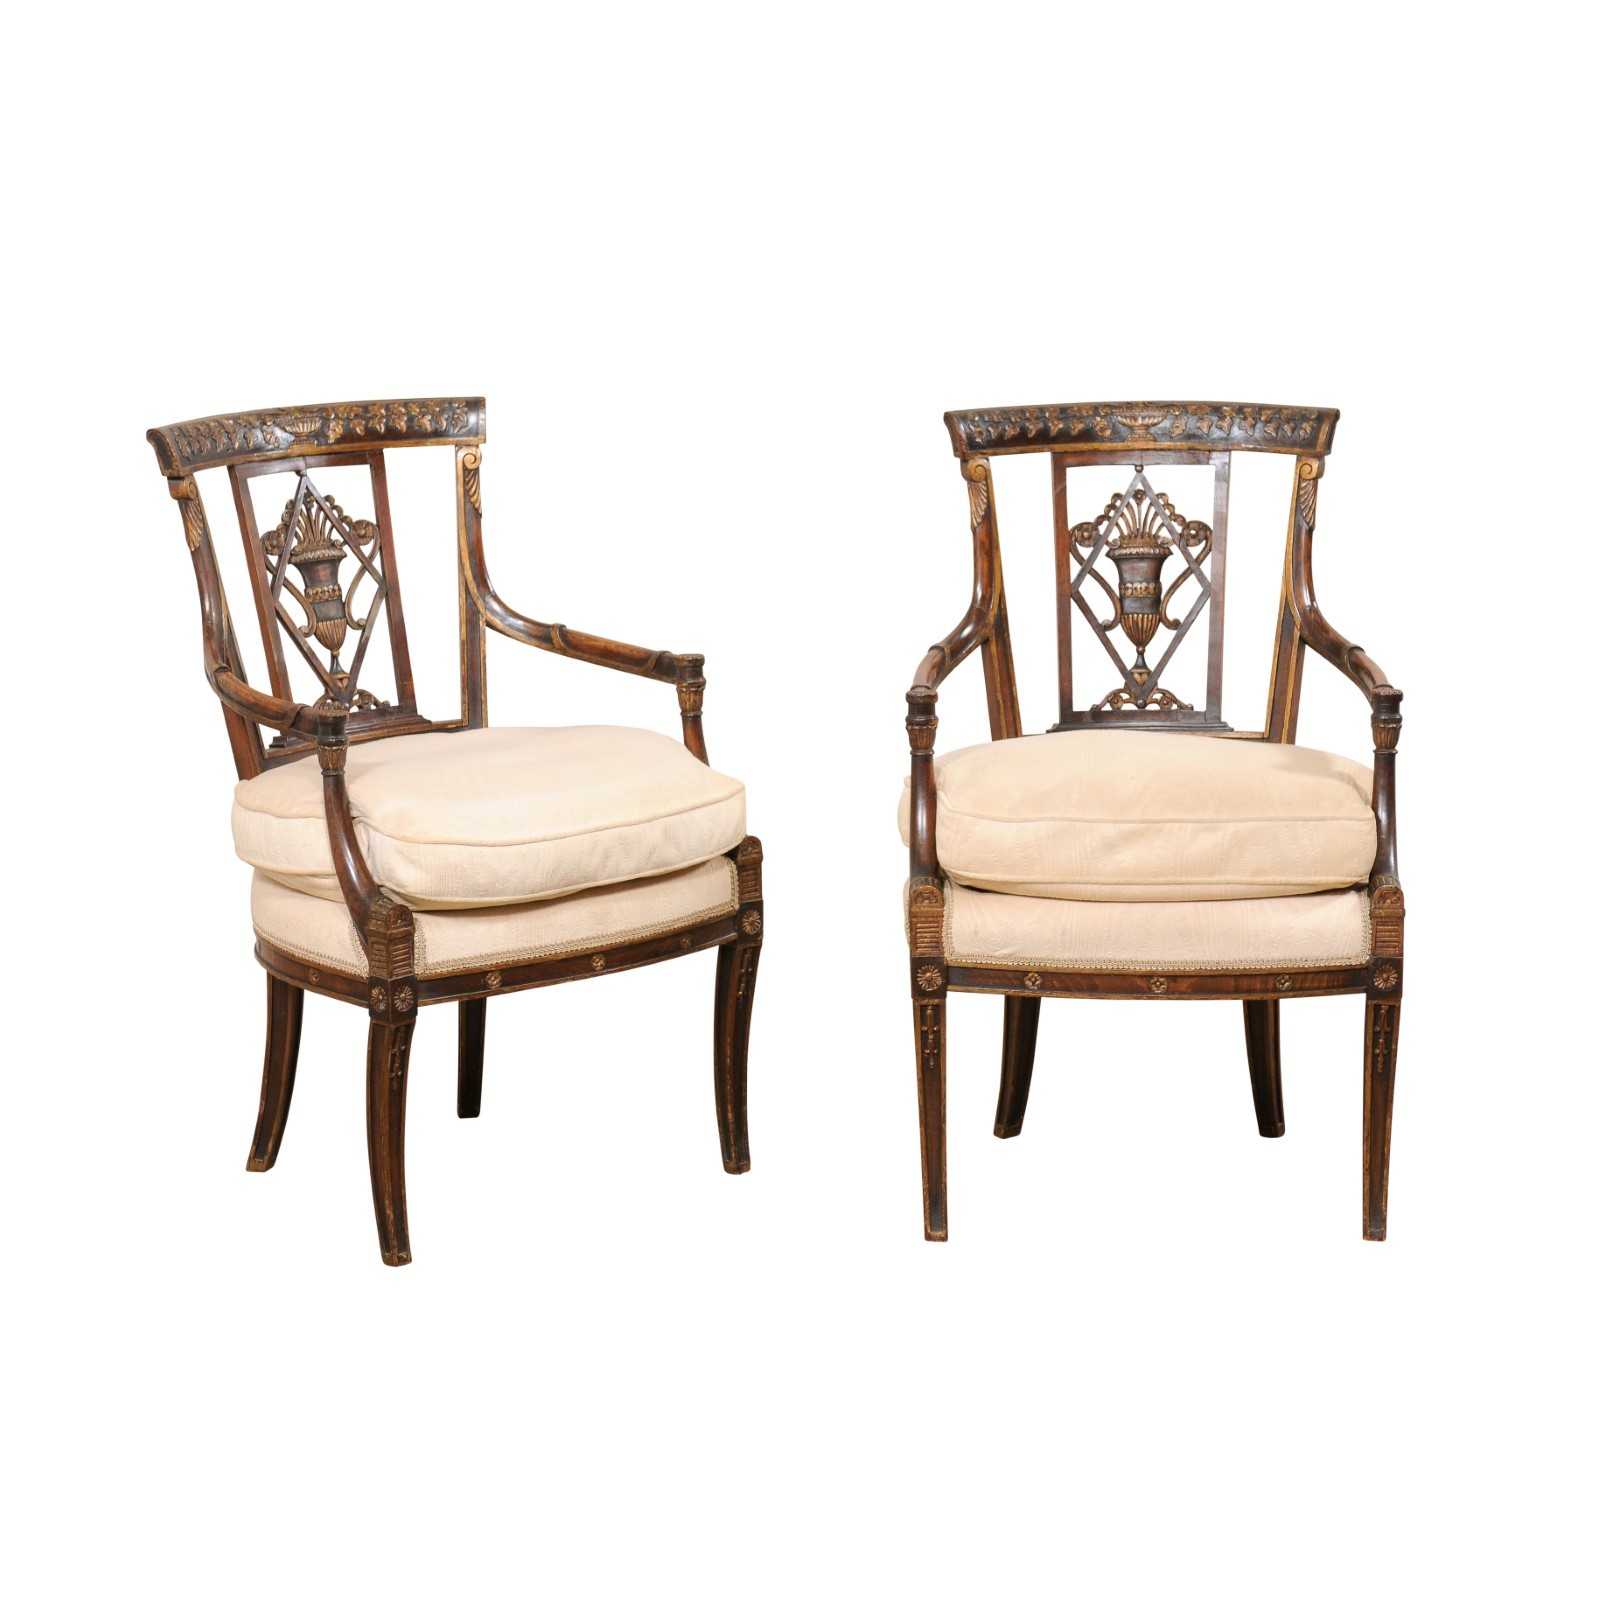 Antique Armchairs w/Neoclassical Carvings 